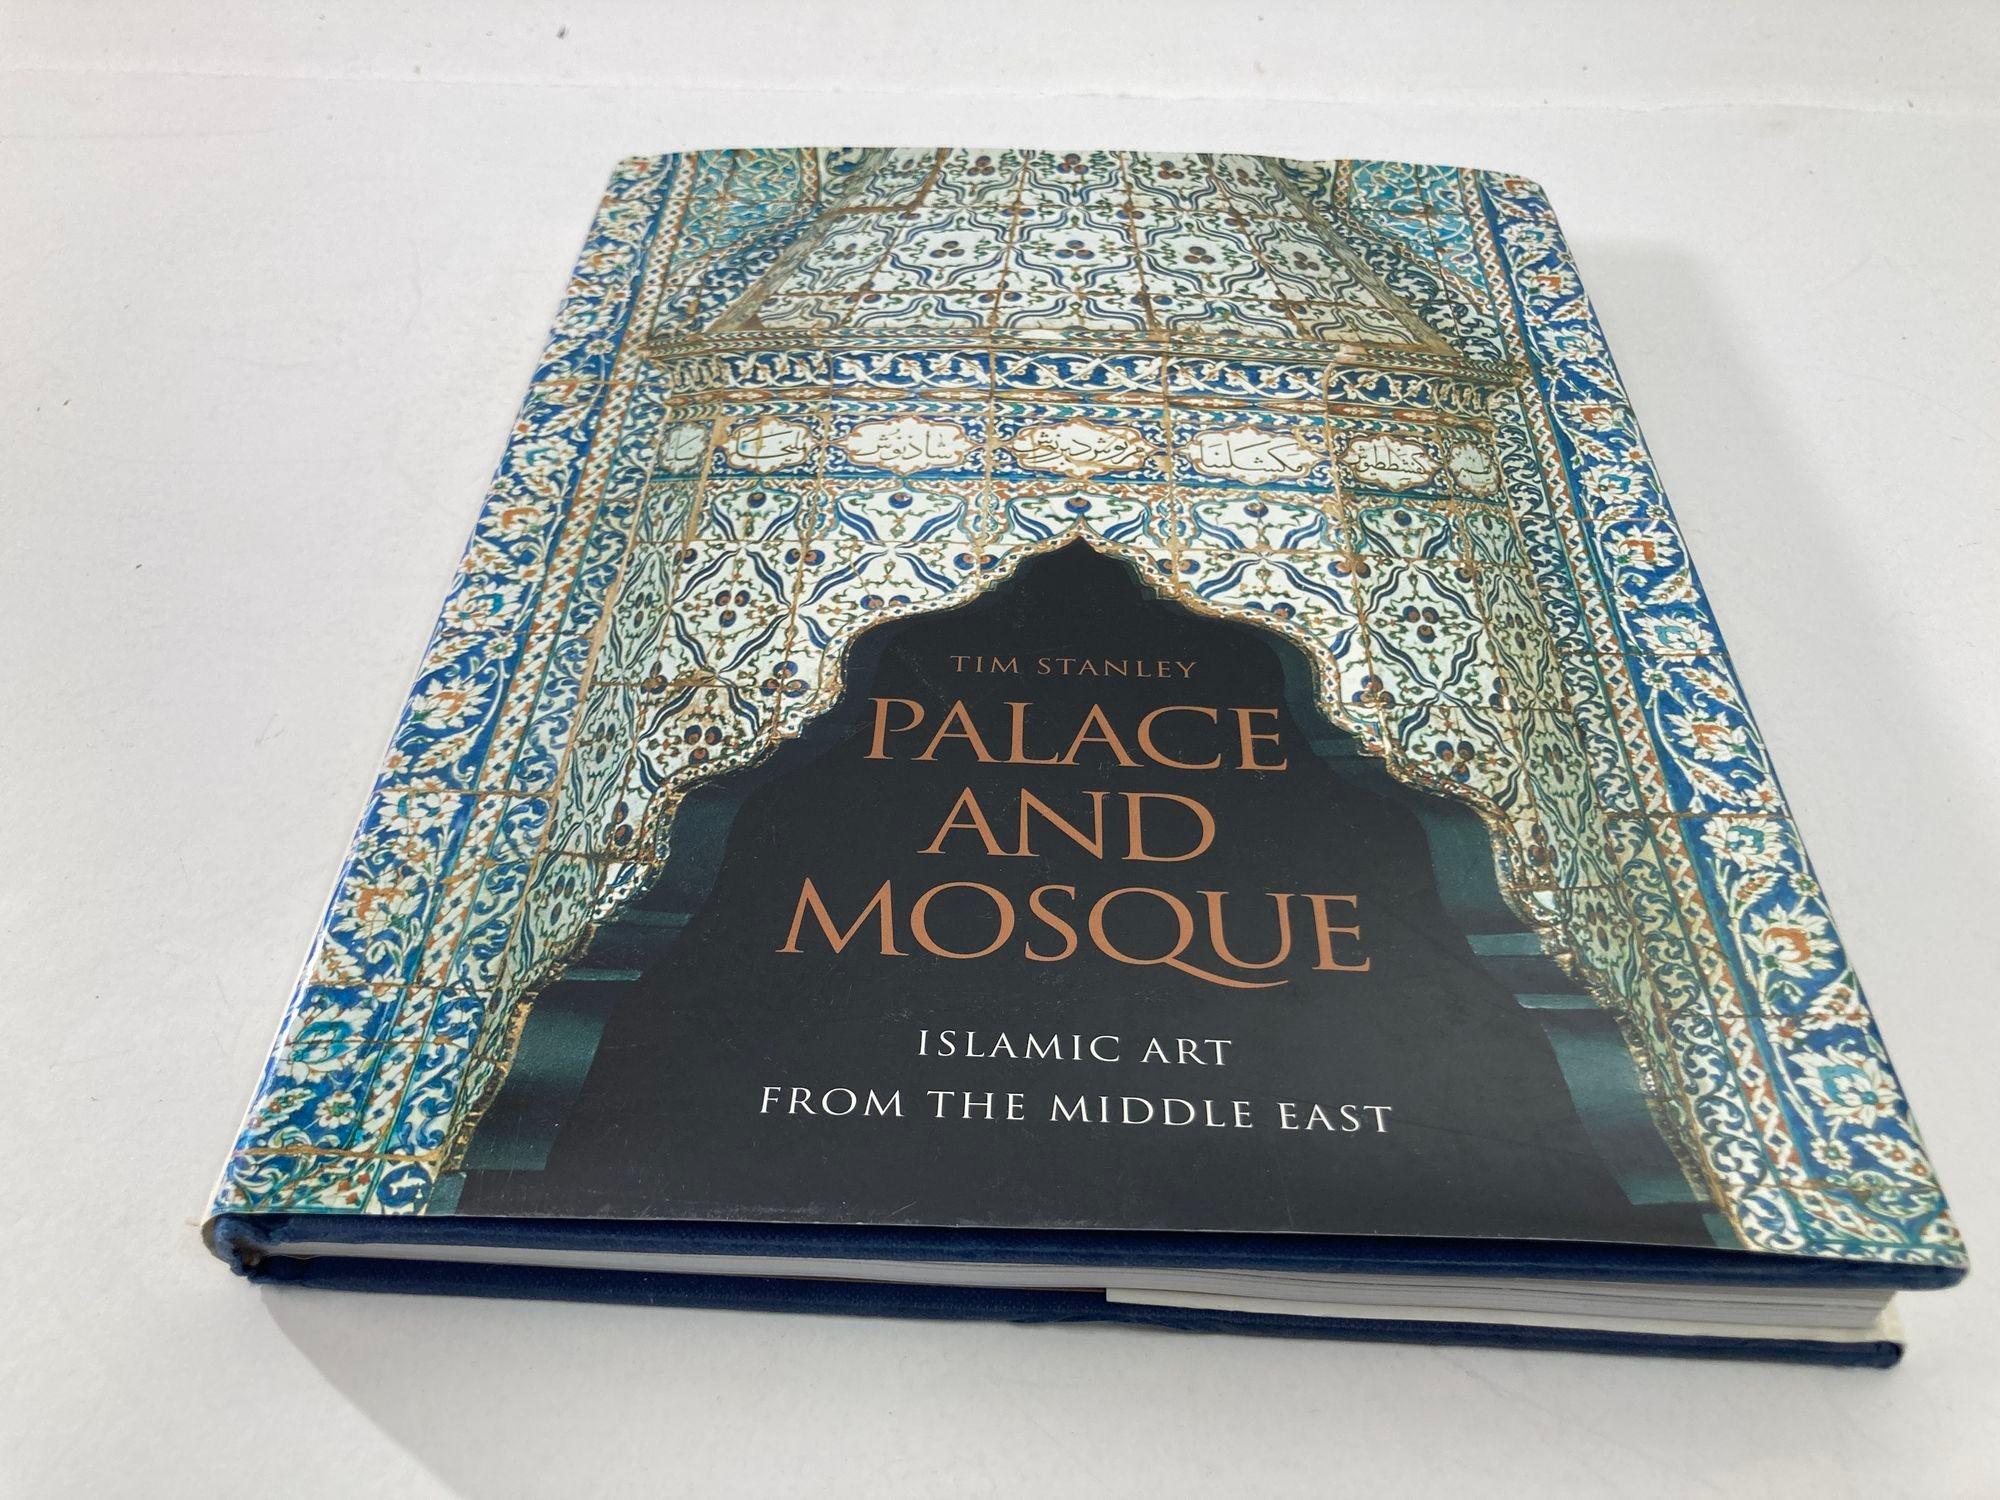 Palace and Mosque : Islamic Art from the Middle East Book by Tim Stanley.
1st Edition 2004. Great hardcover table book.
This fascinating introduction to Islamic art and culture draws on examples from the world famous collections of the V&A. The